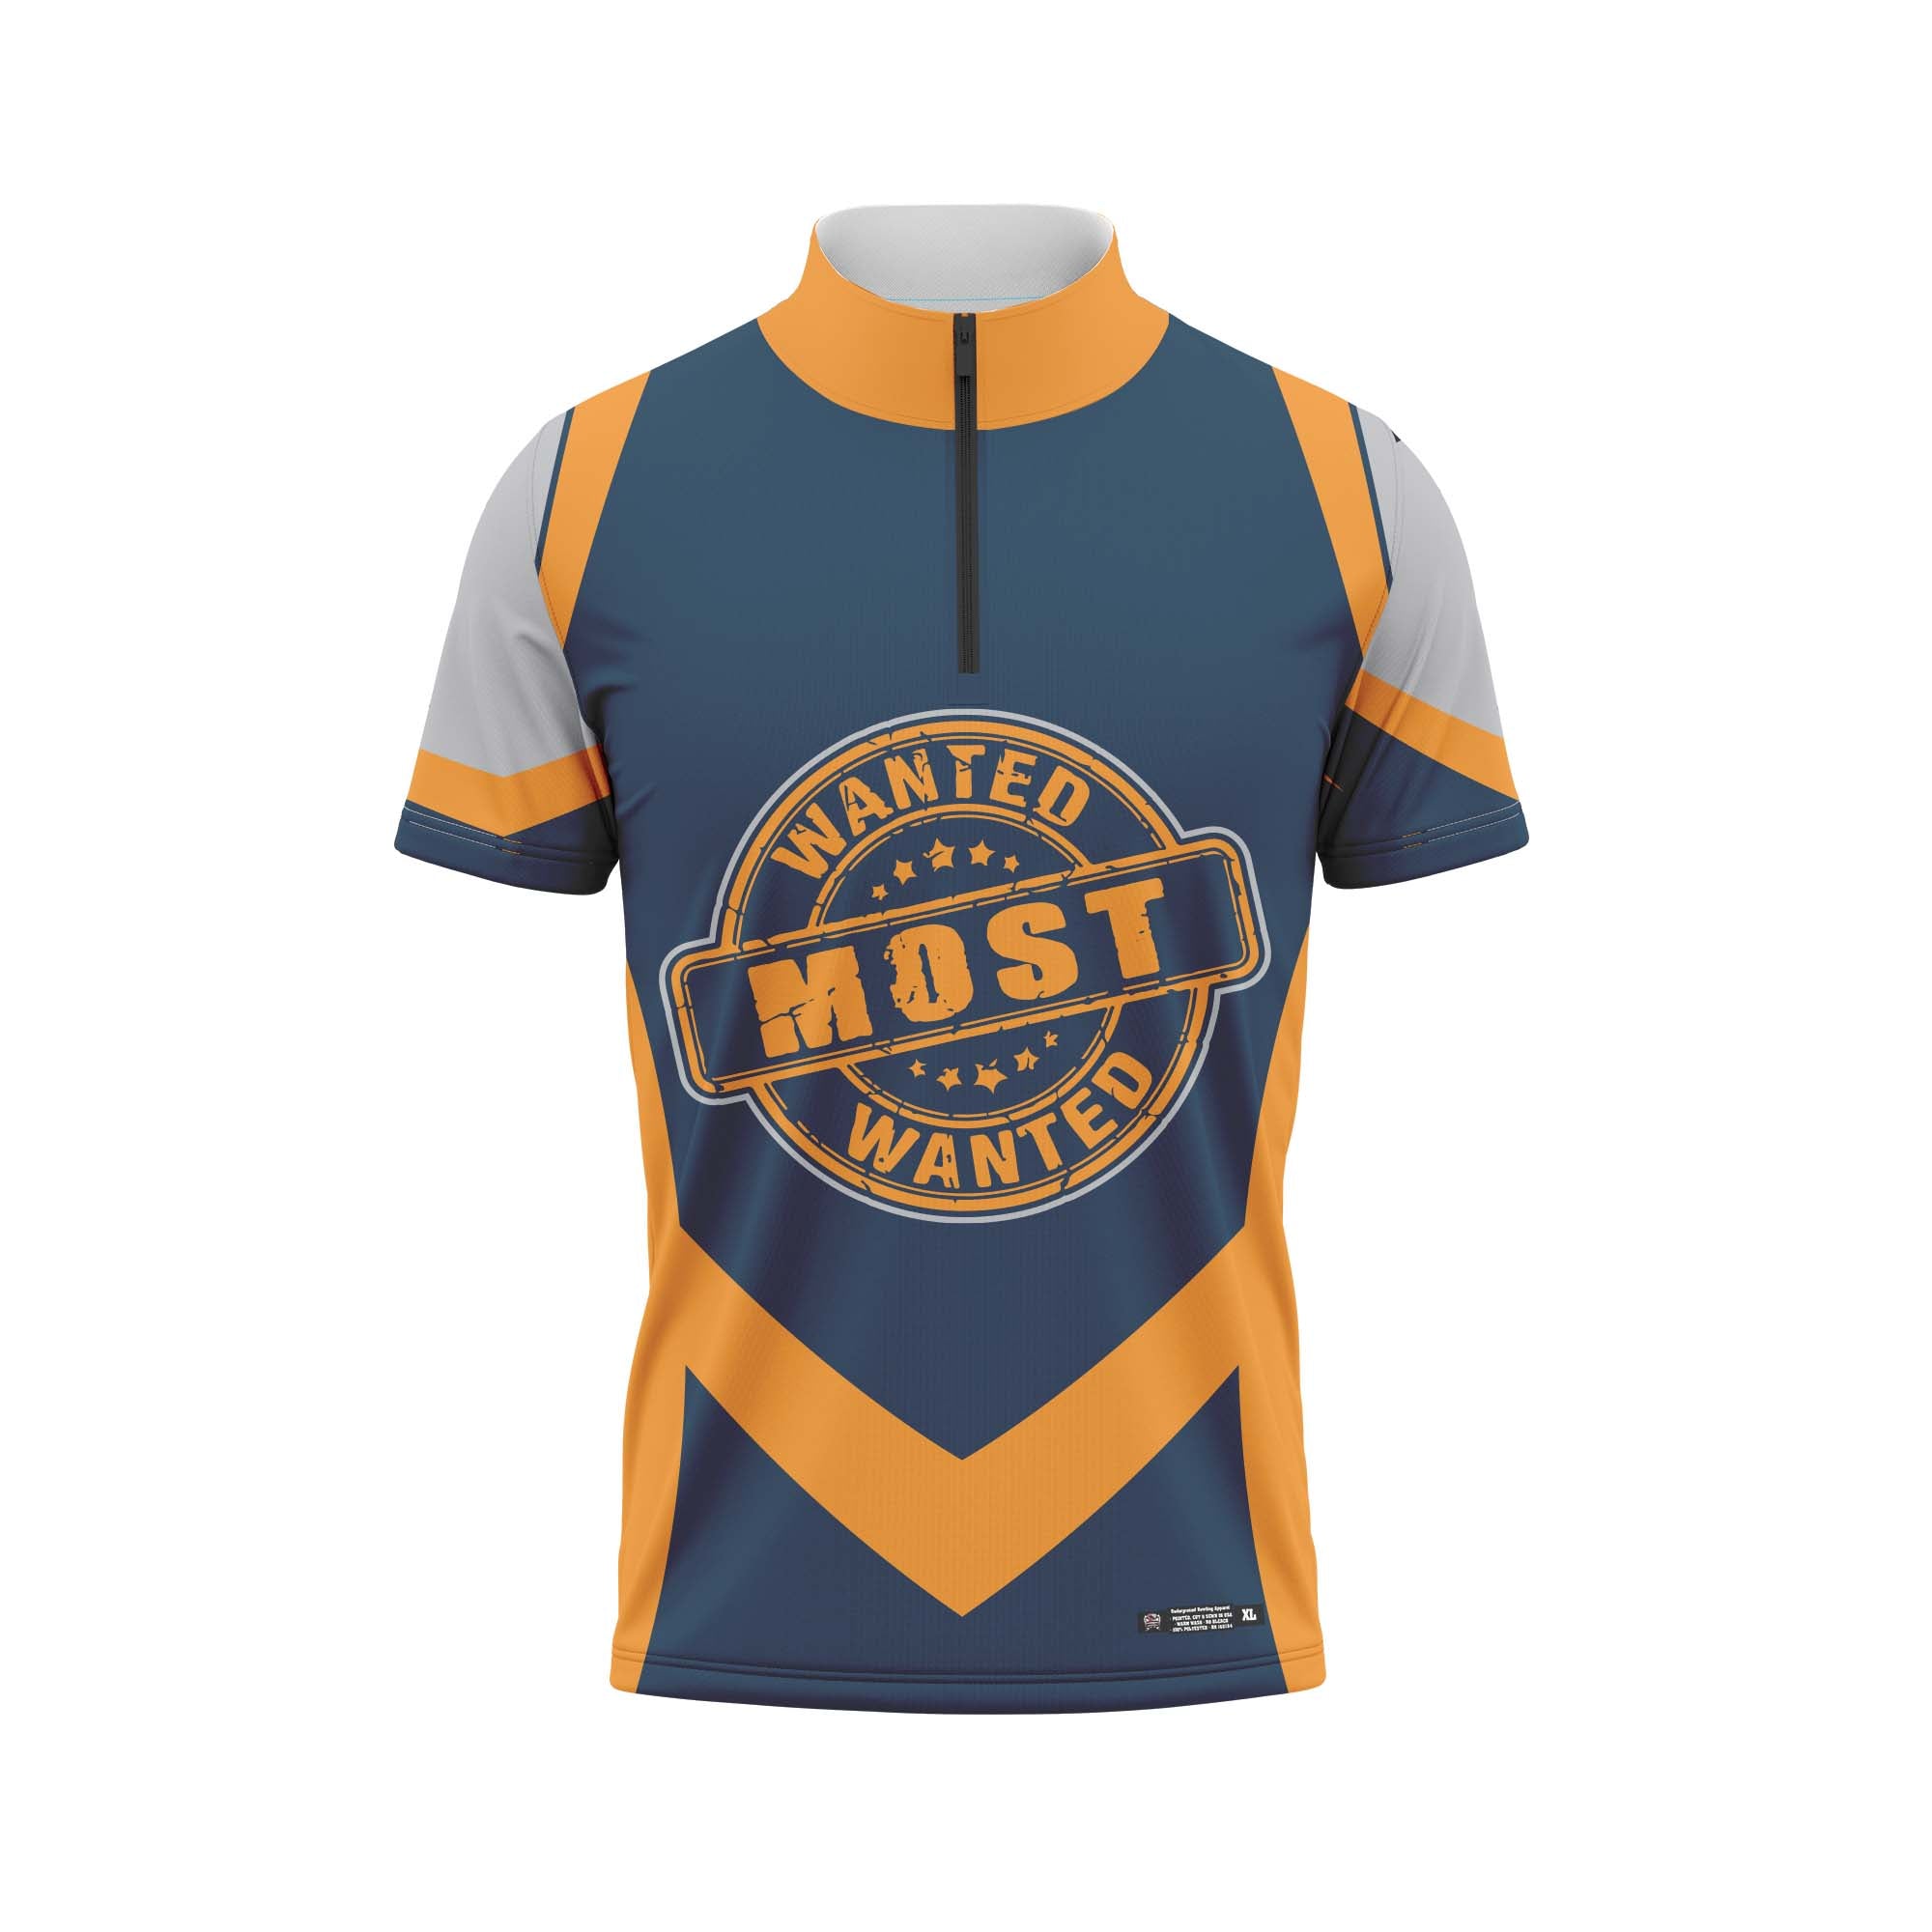 Most Wanted Navy Jersey